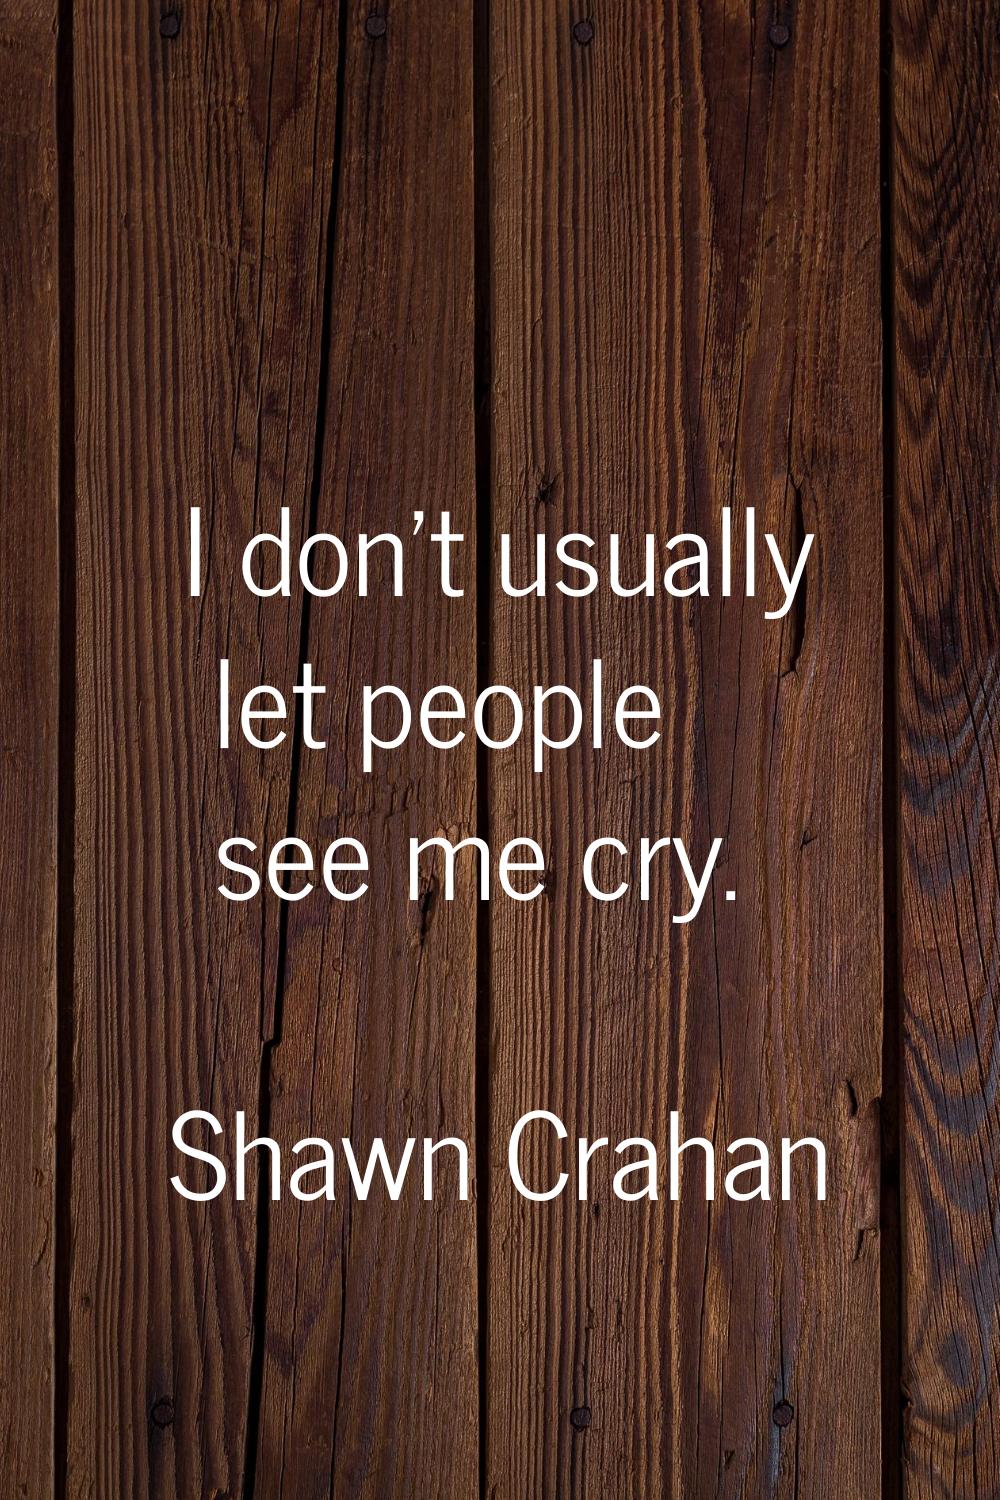 I don't usually let people see me cry.